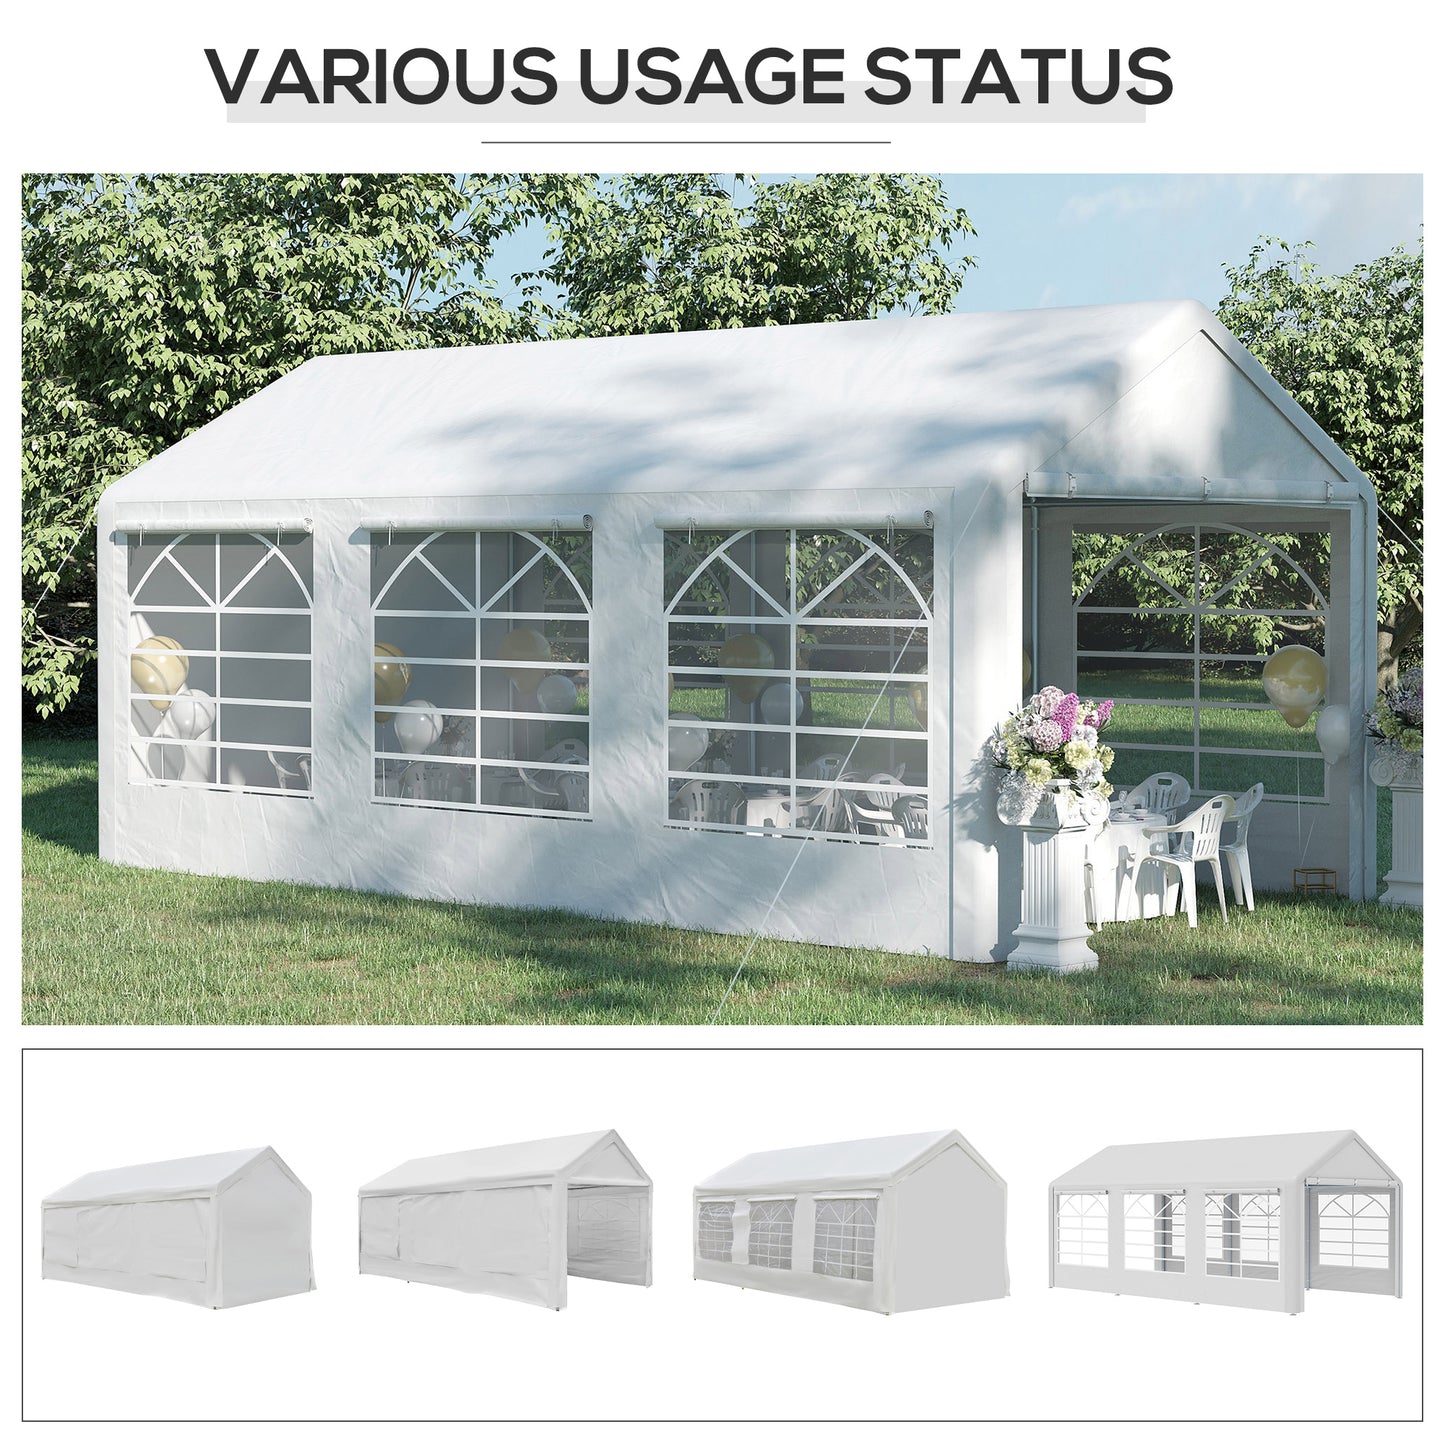 Outsunny 20â€™ x 10â€™ Heavy Duty Car Tent Outdoor Car Canopy Shelter Party Tent w/ Water-Resistant Sidewall Cloth Zipper Door Windows White Carport